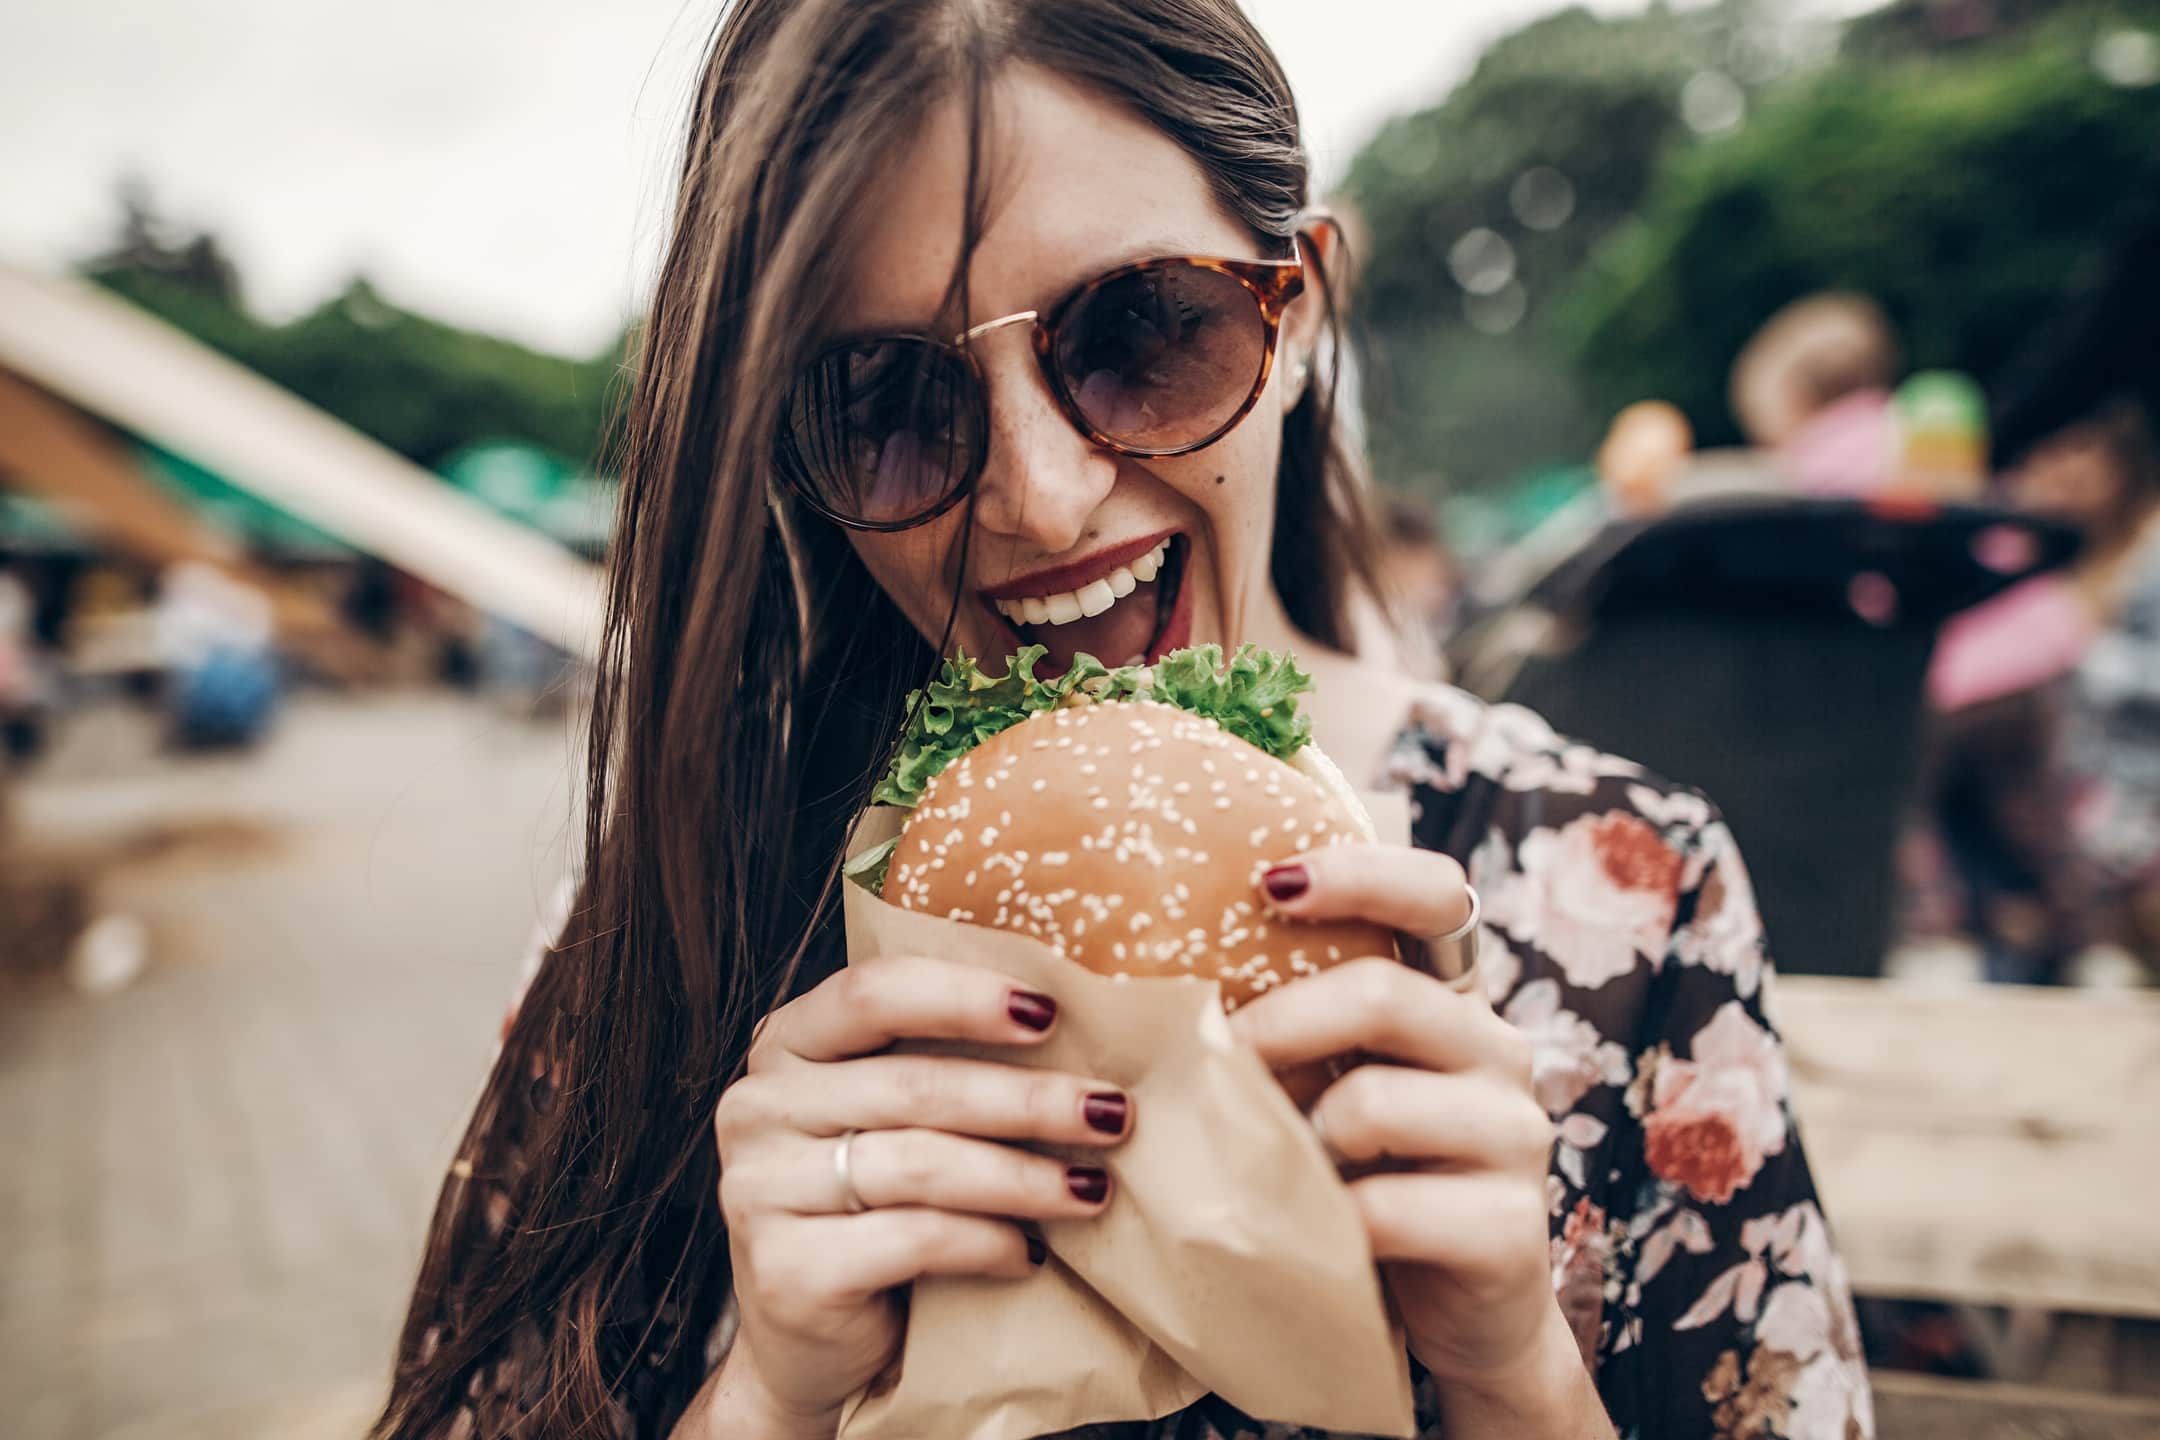 stylish hipster woman eating juicy burger. boho girl biting cheeseburger, smiling at street food festival. summertime. summer vacation travel picnic. space for text